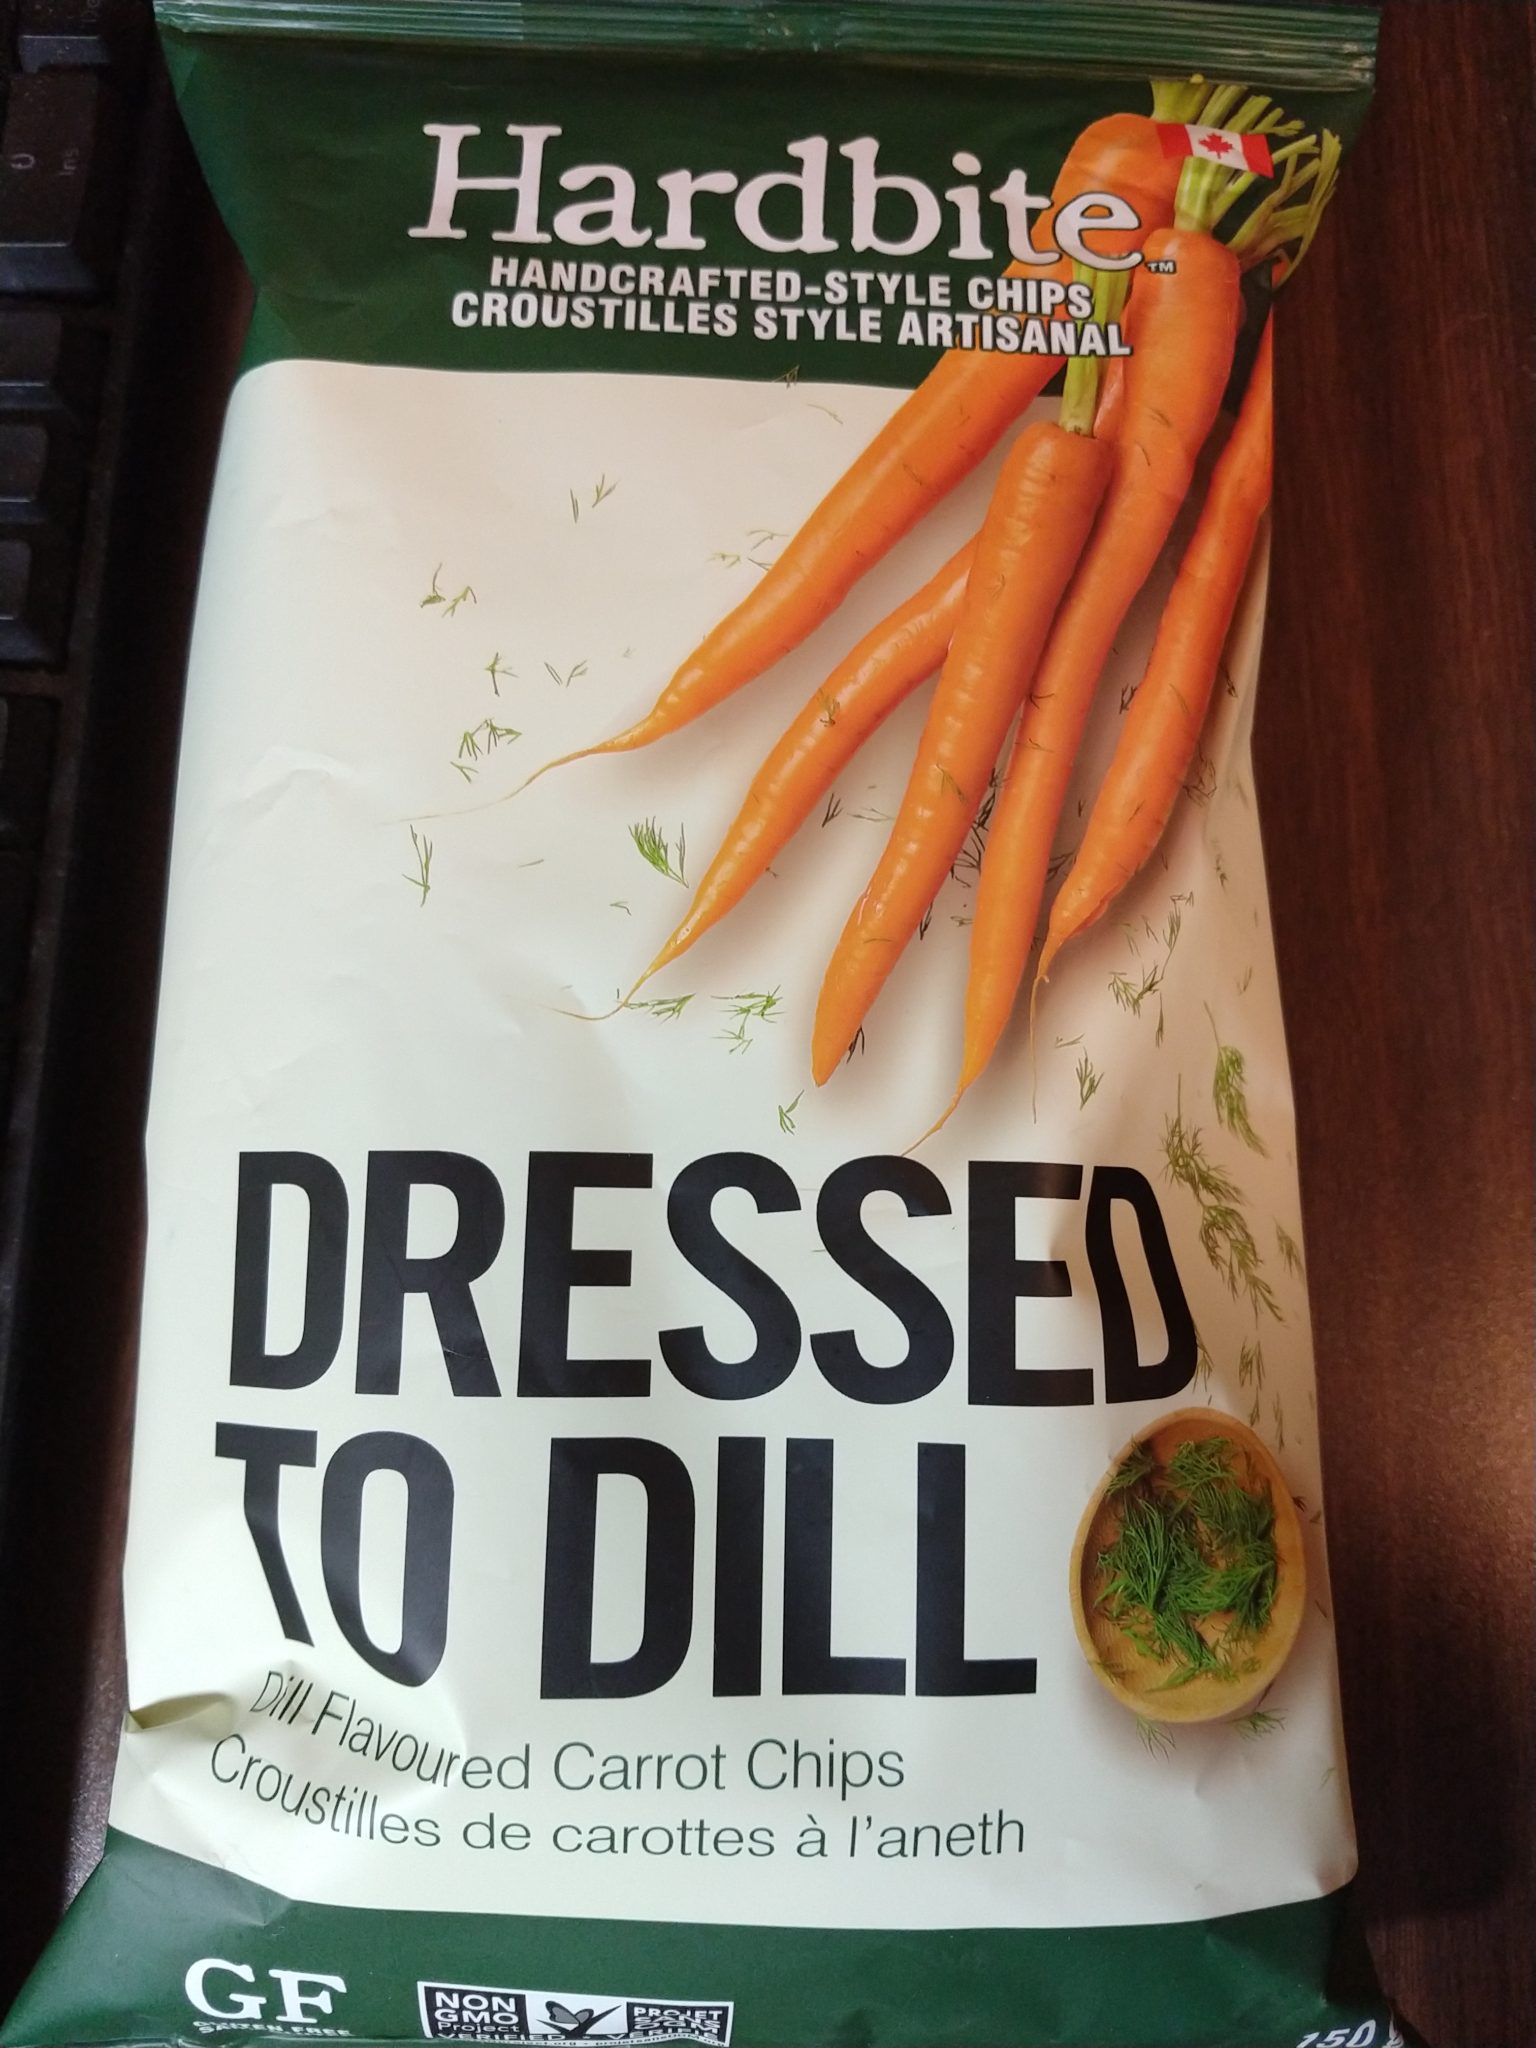 Hardbite Dressed to Dill Carrot Chips